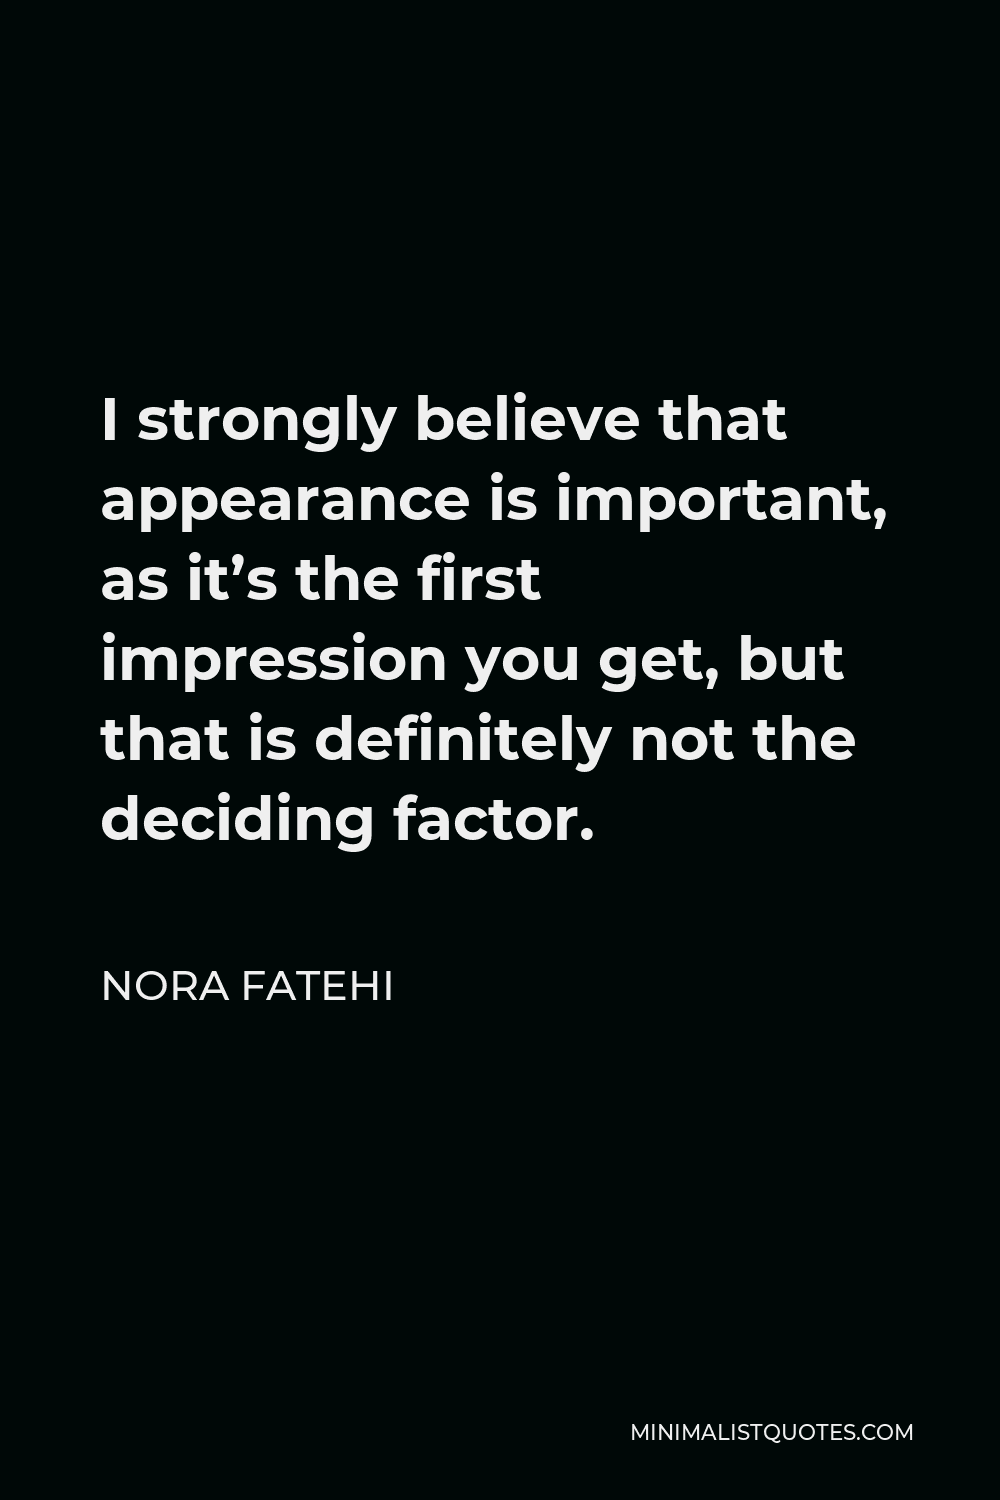 Nora Fatehi Quote - I strongly believe that appearance is important, as it’s the first impression you get, but that is definitely not the deciding factor.